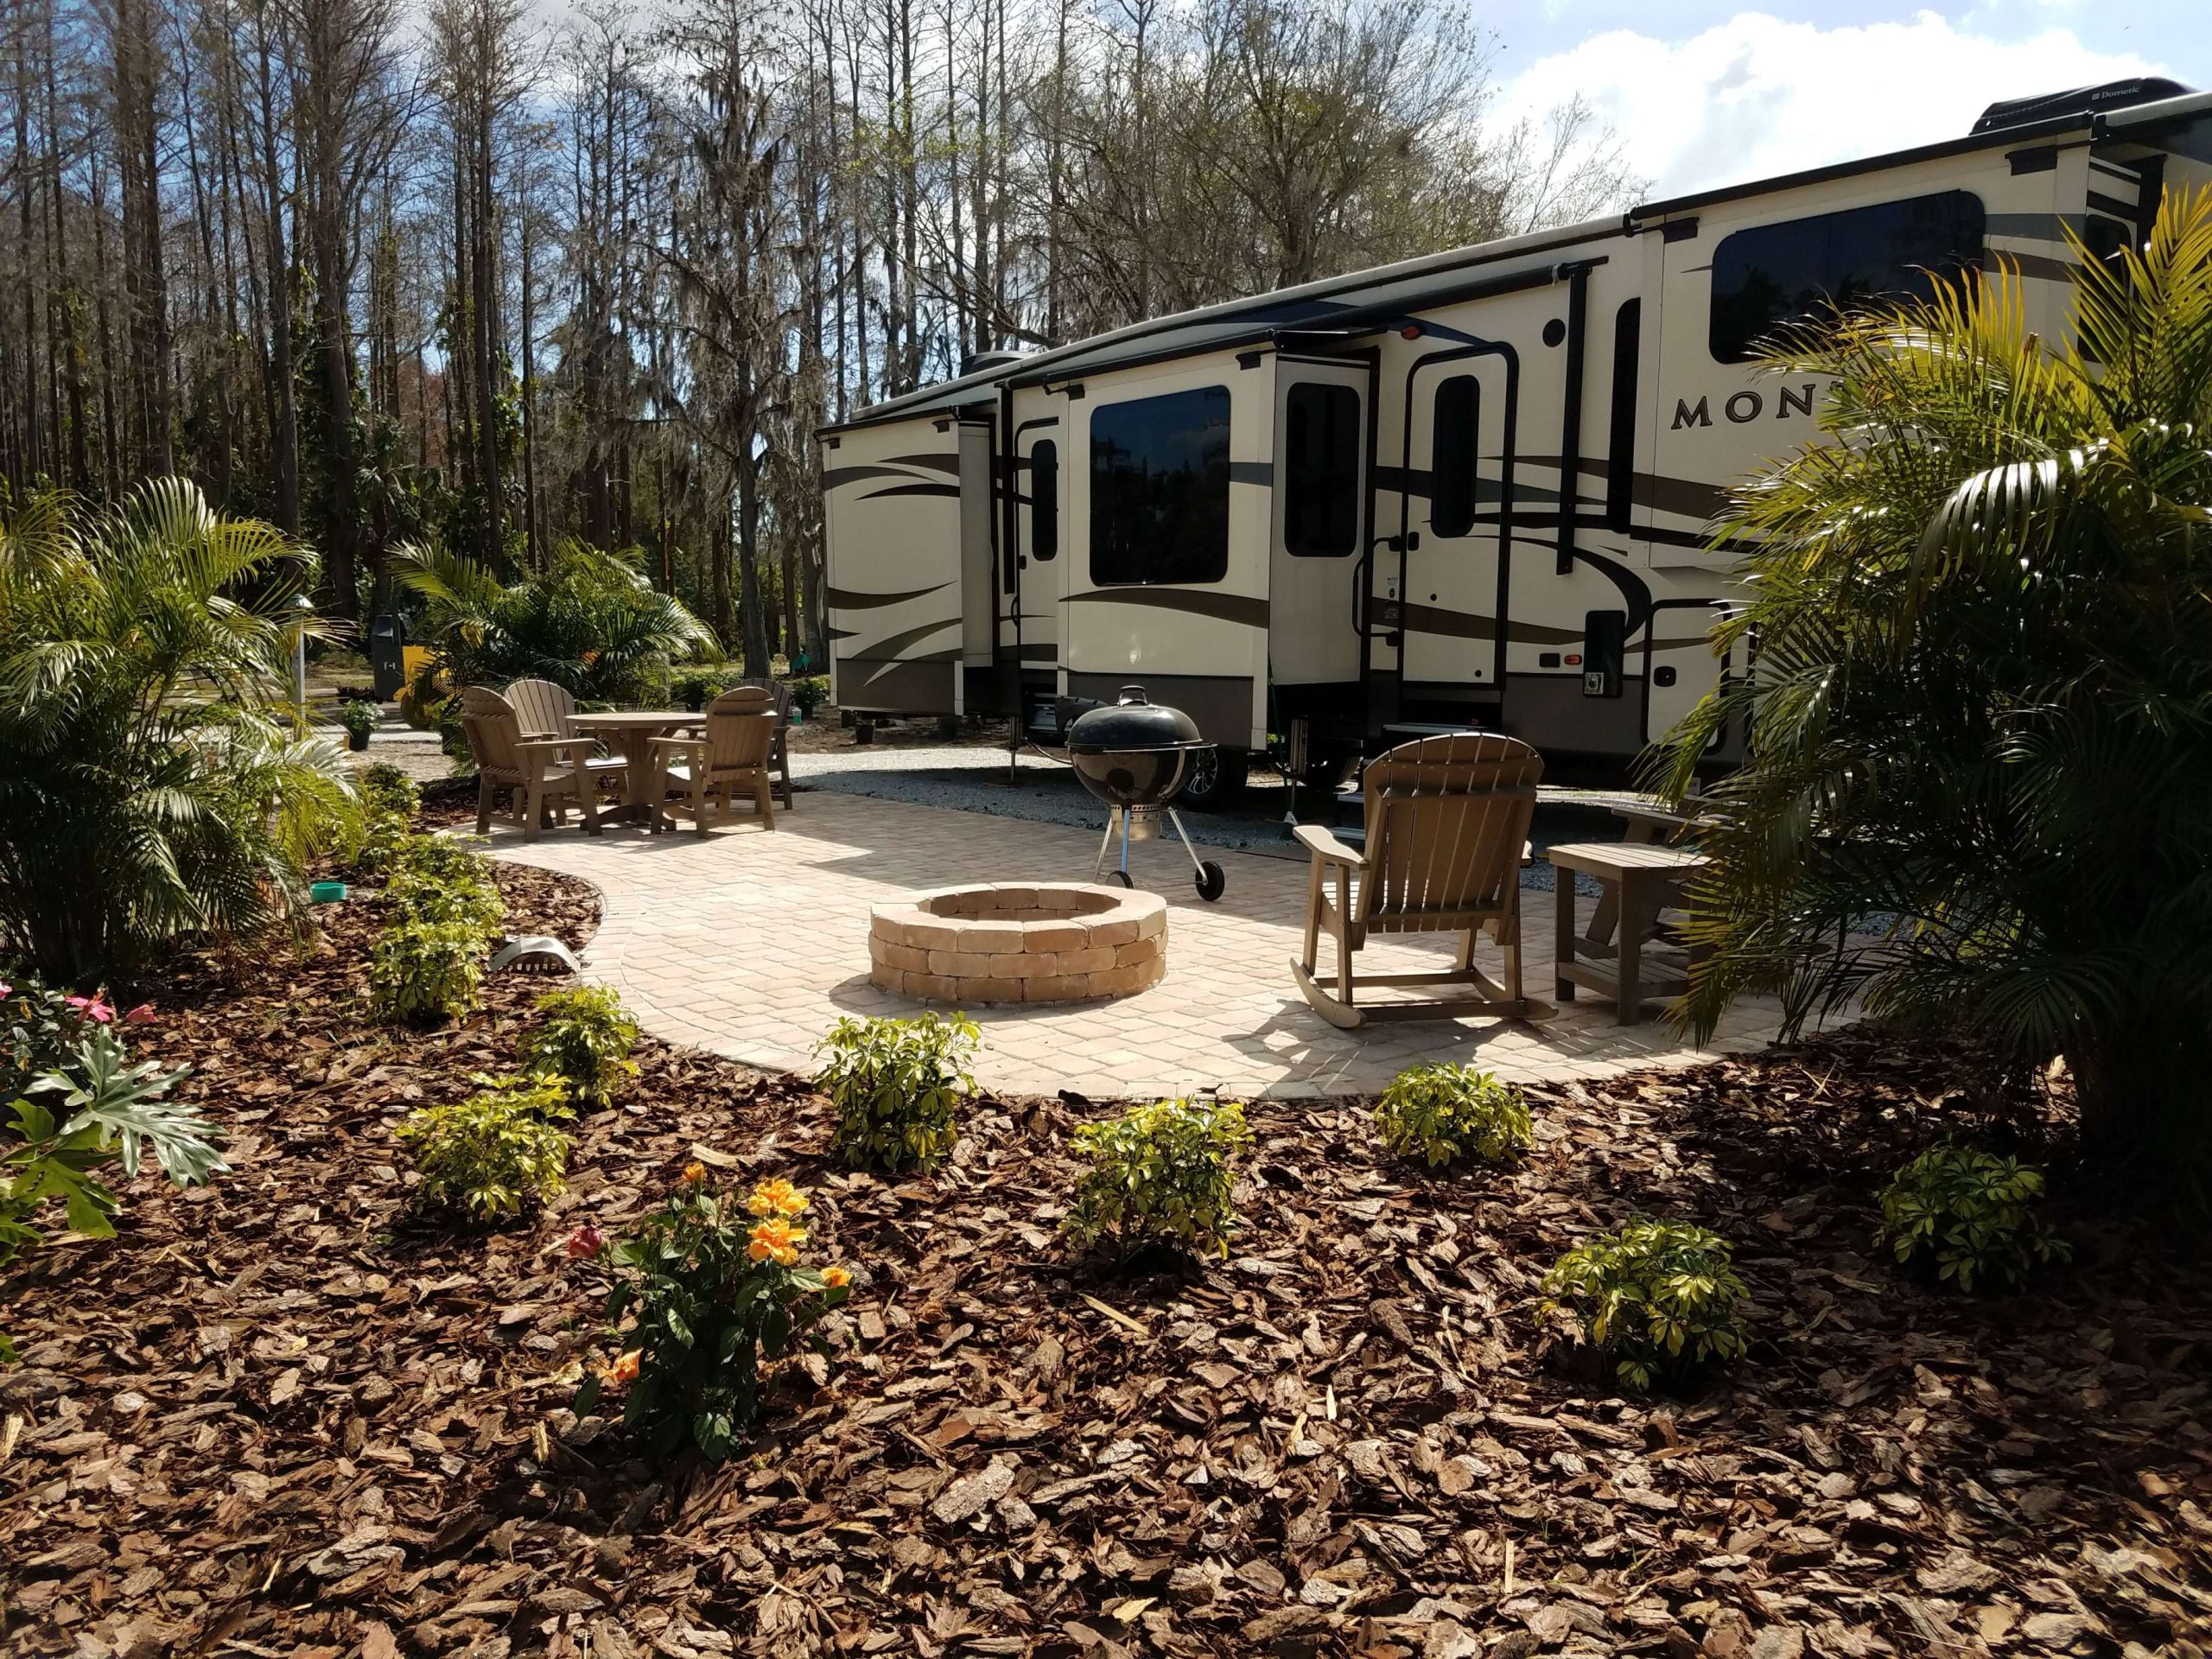 Expansive and lush landscaping surround this RV patio site at the